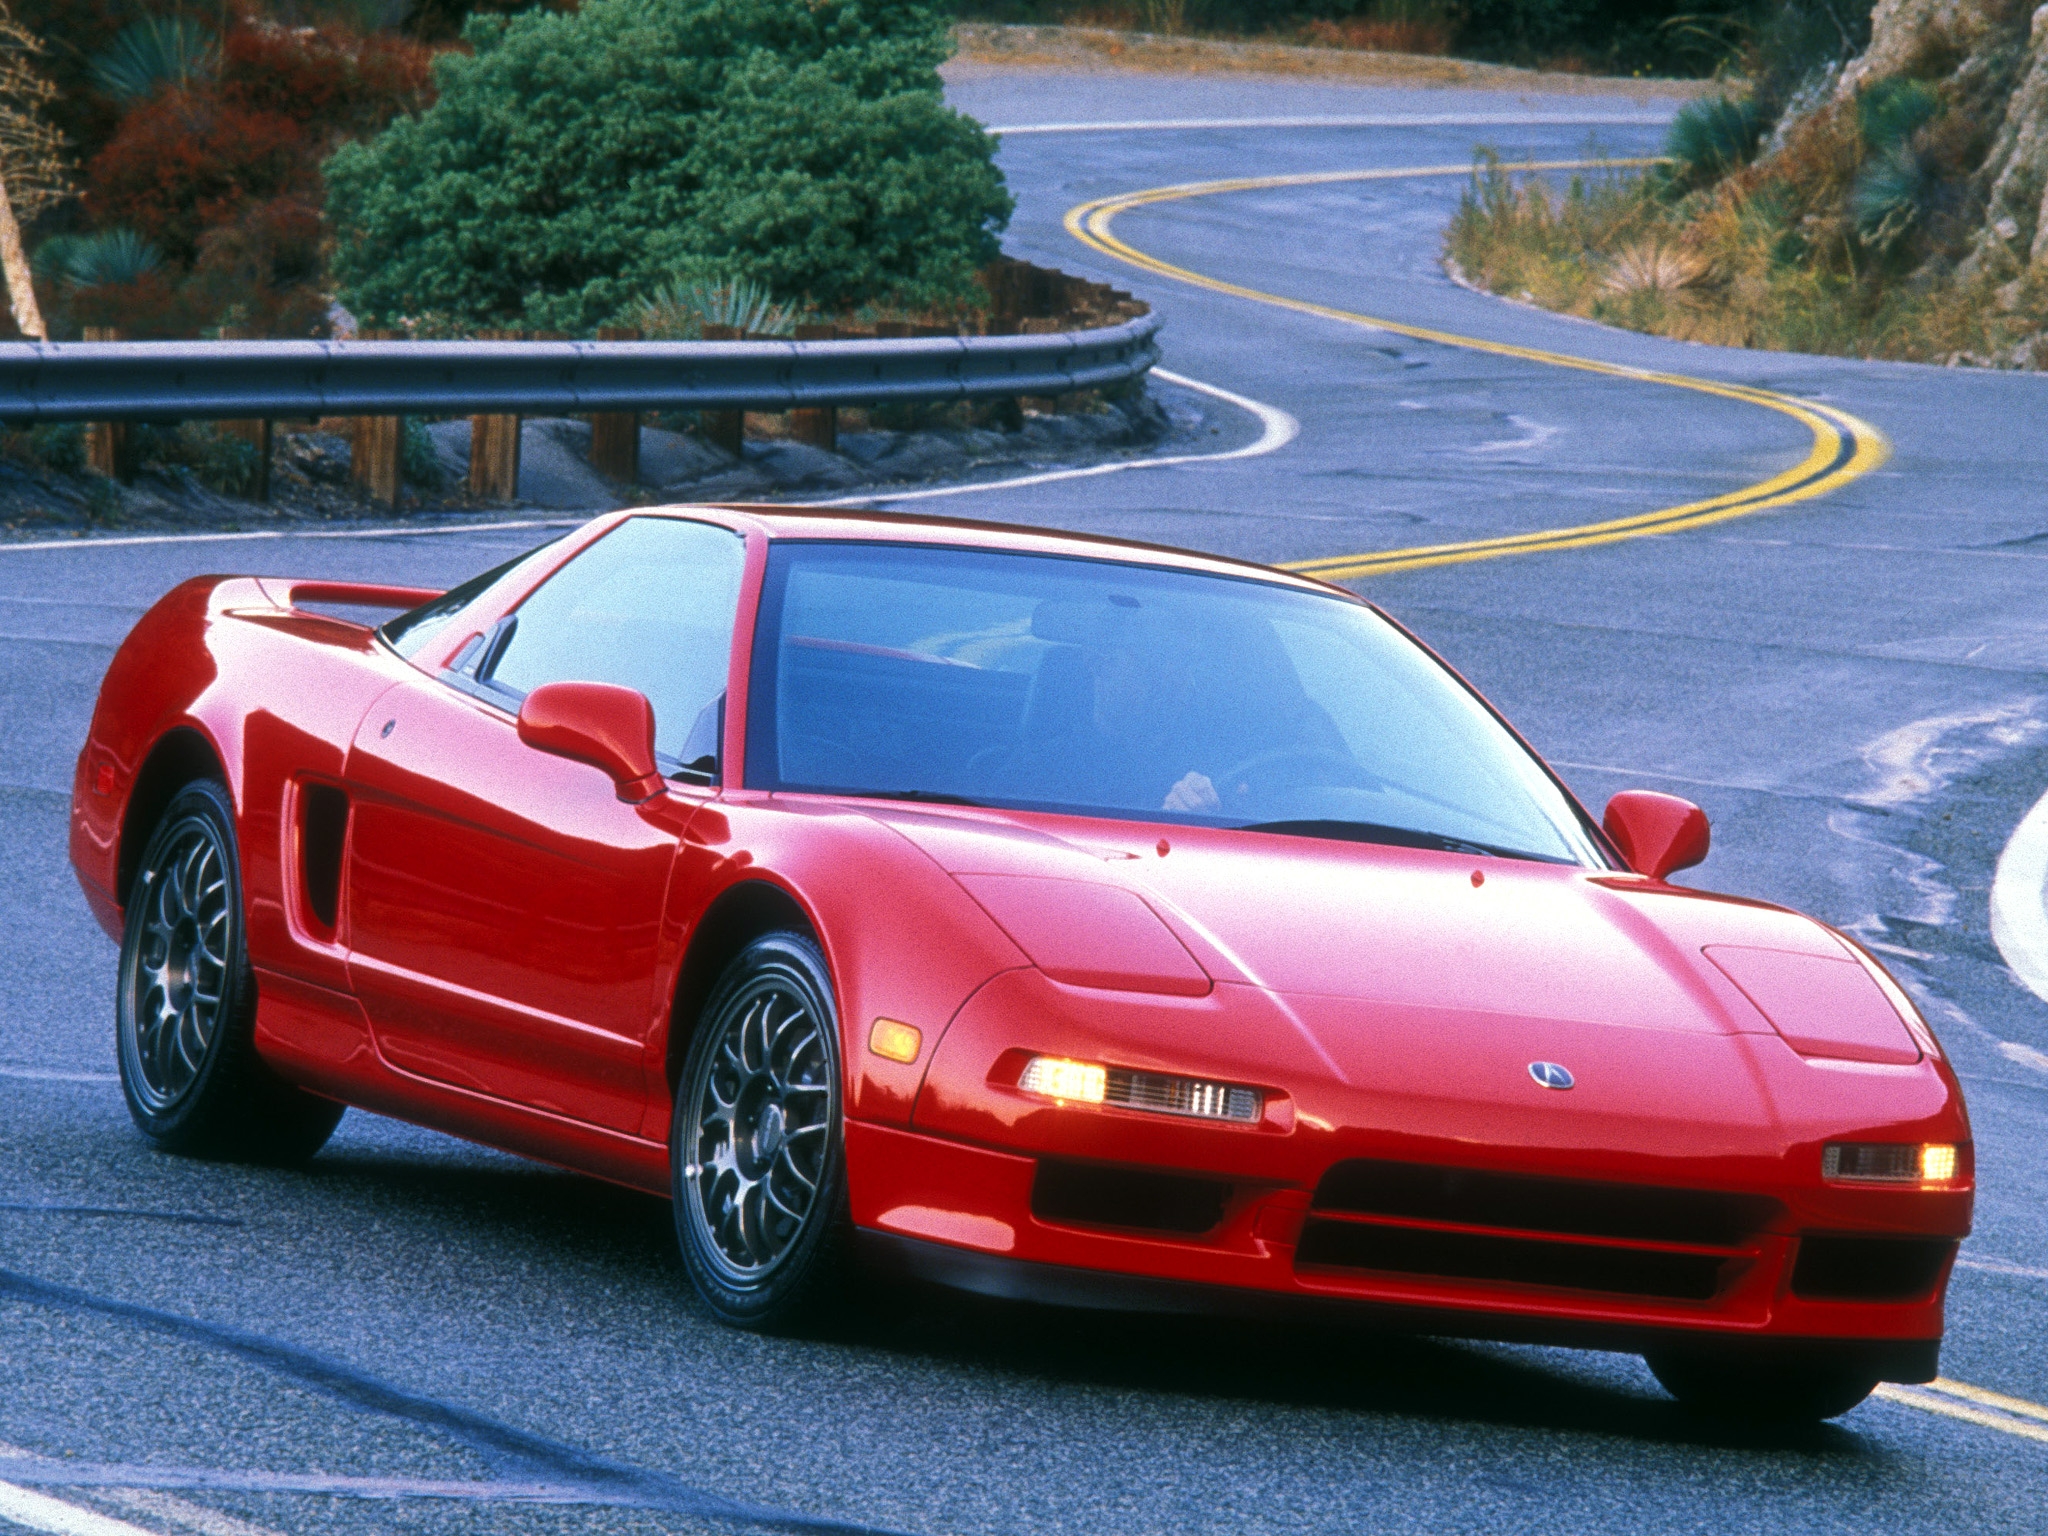 road, acura, sports, auto, nature, cars, red, front view, style, akura, 1999, nsx, hsx, nsh